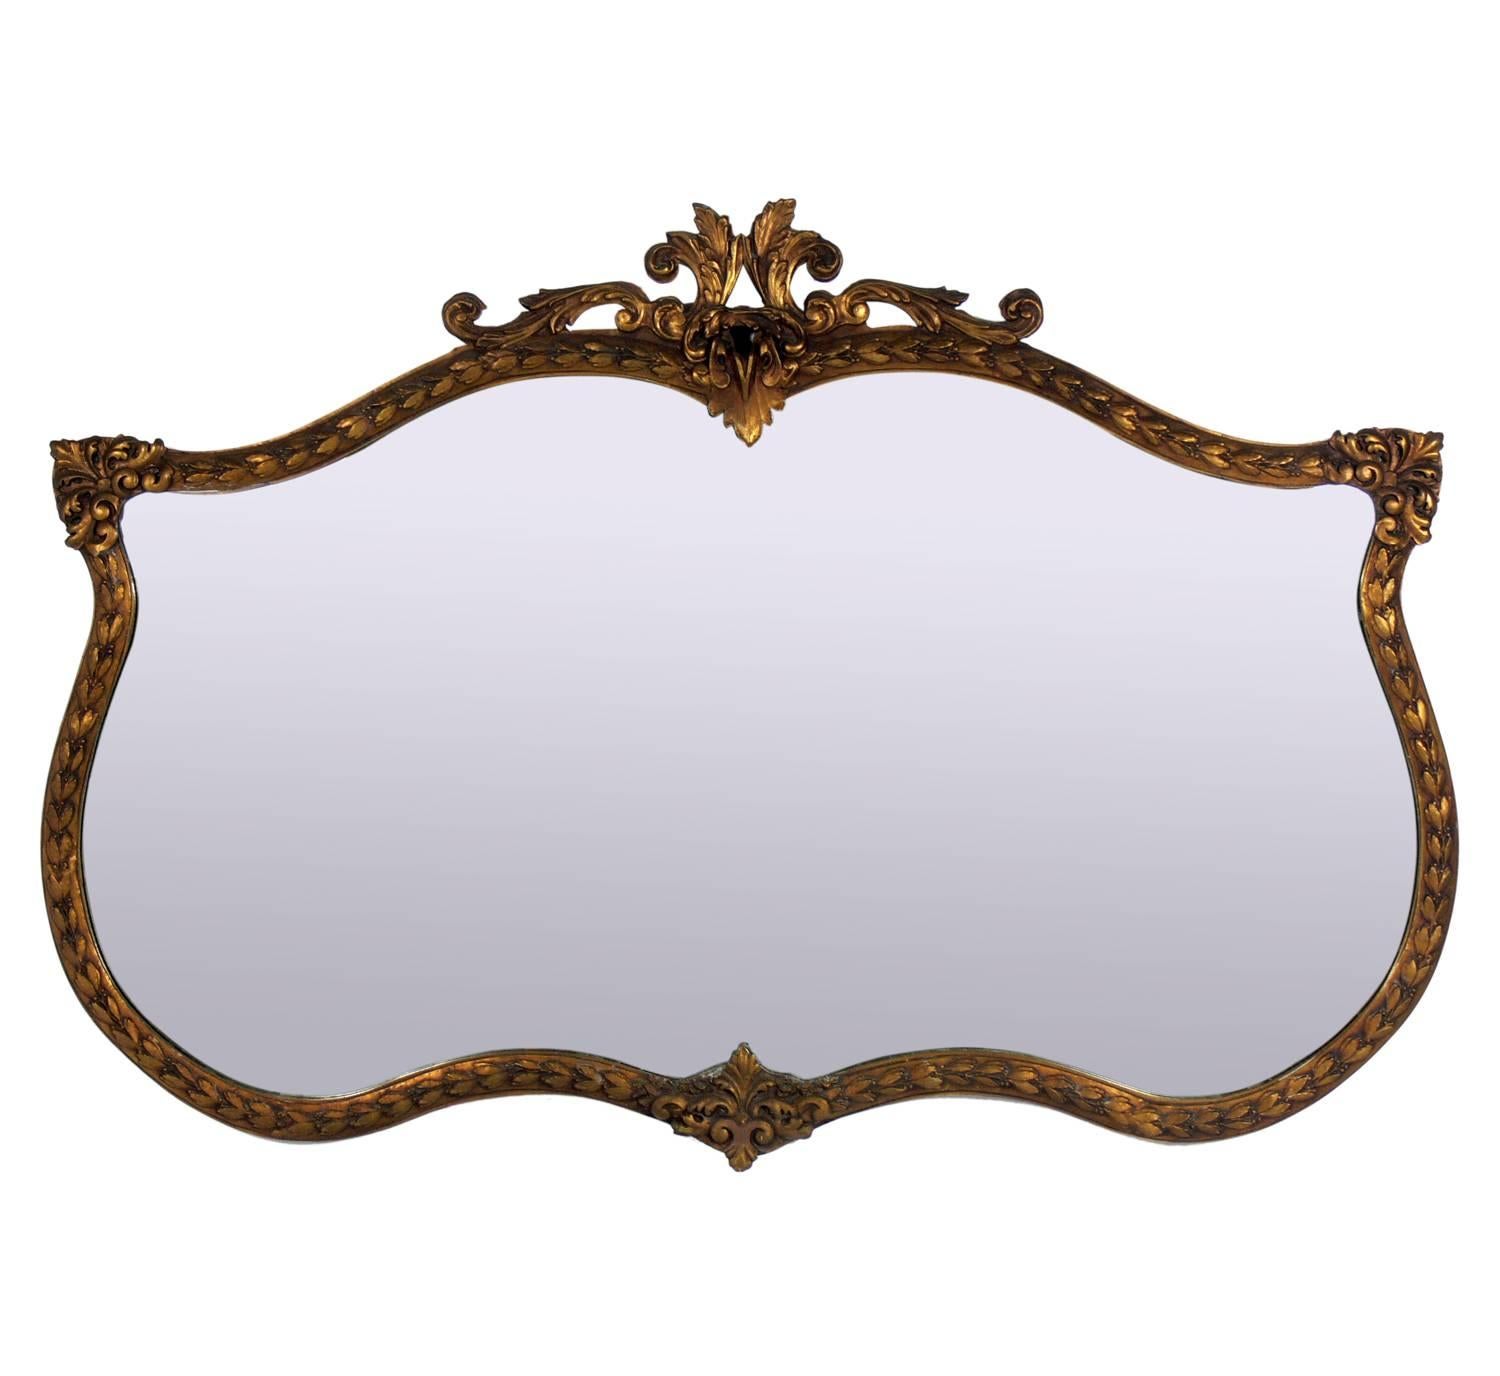 What are ornate mirrors made of?